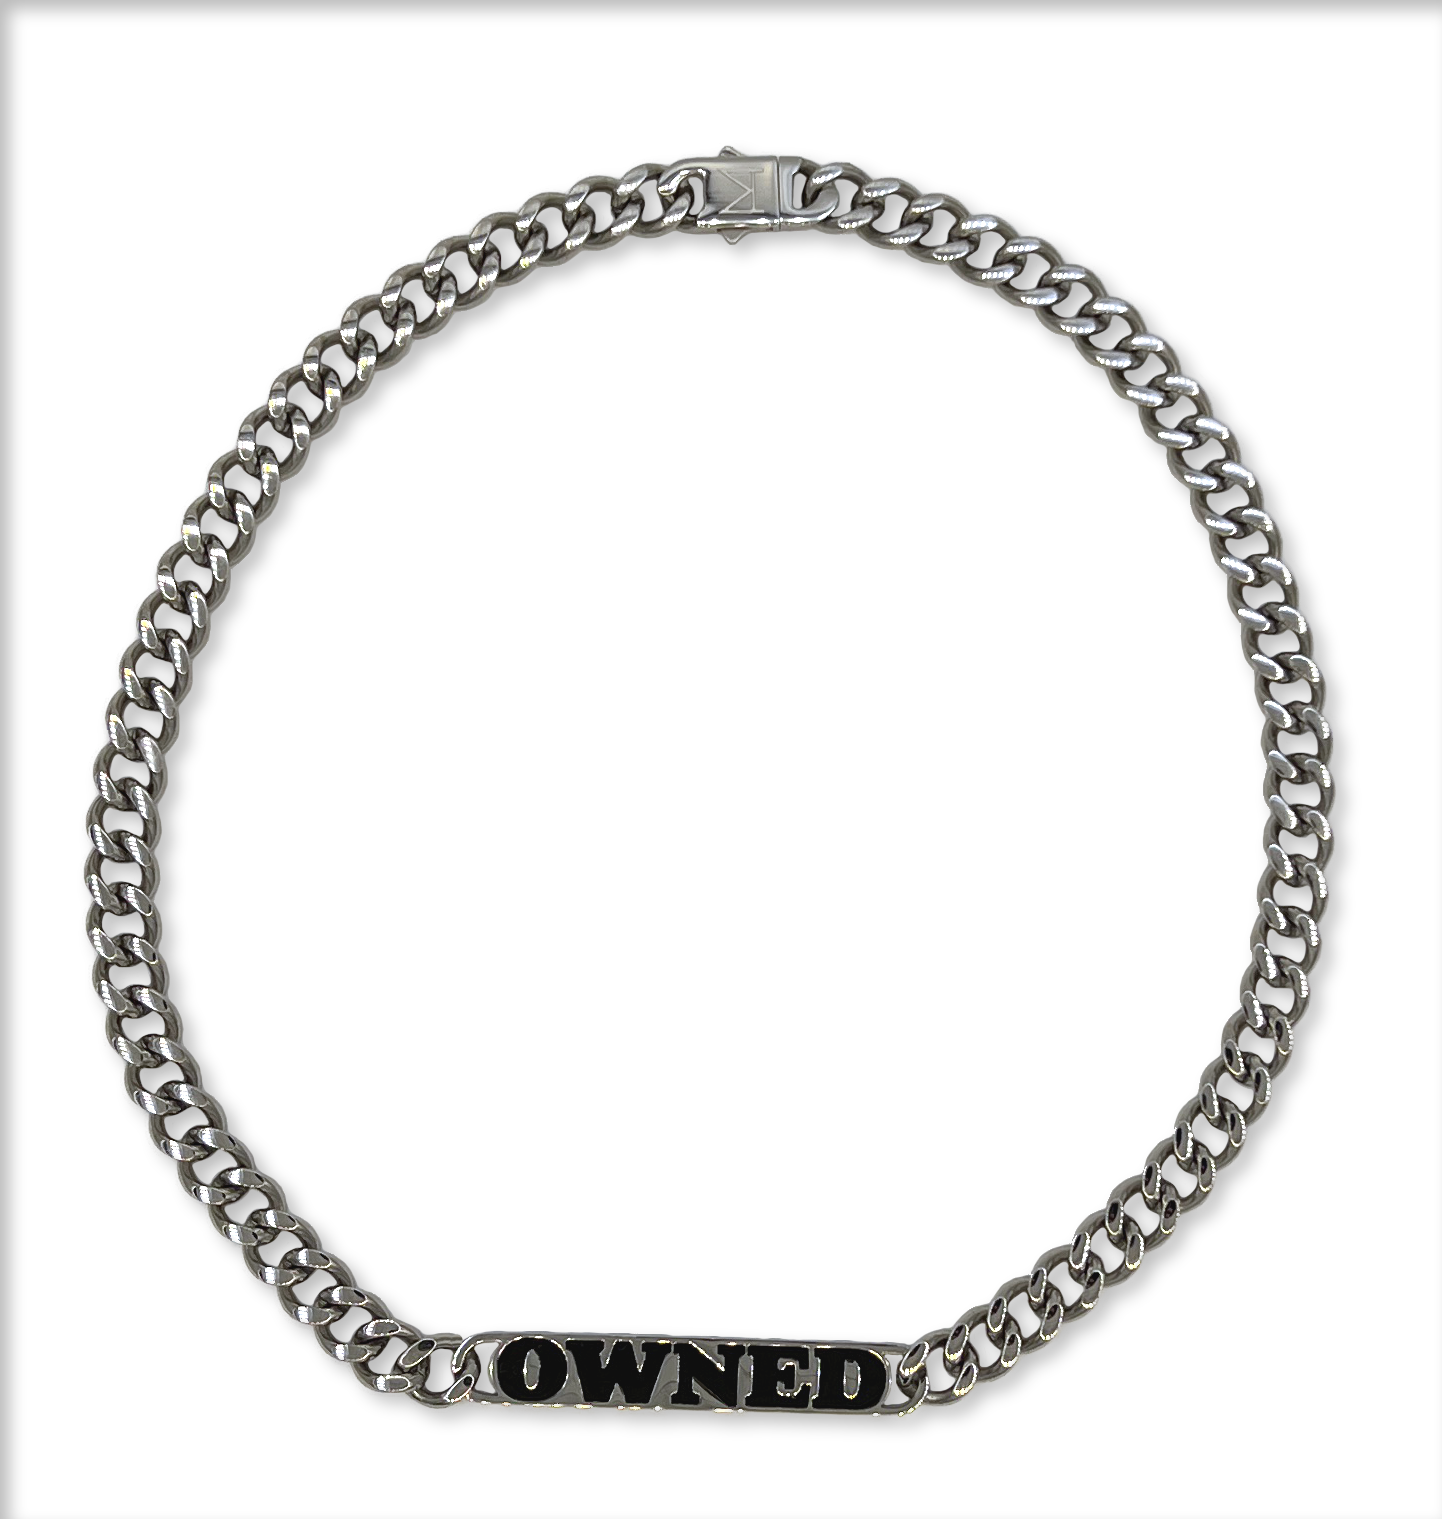 Master of the House Chain "Owned" Silver